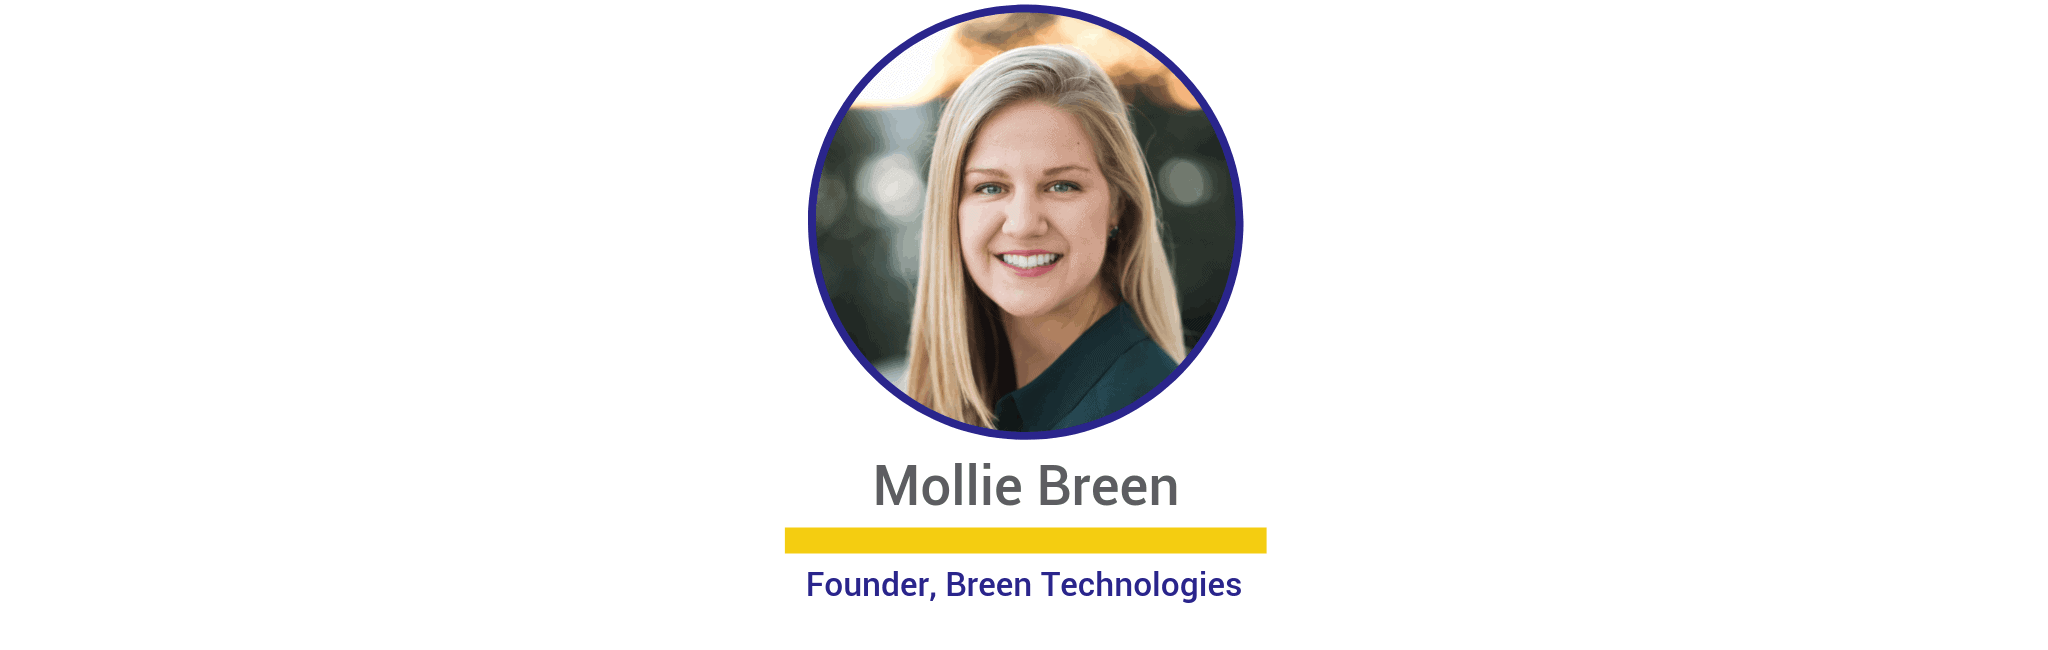 Mollie Breen, Founder of Breen Technologies, Securing the Internet of Things